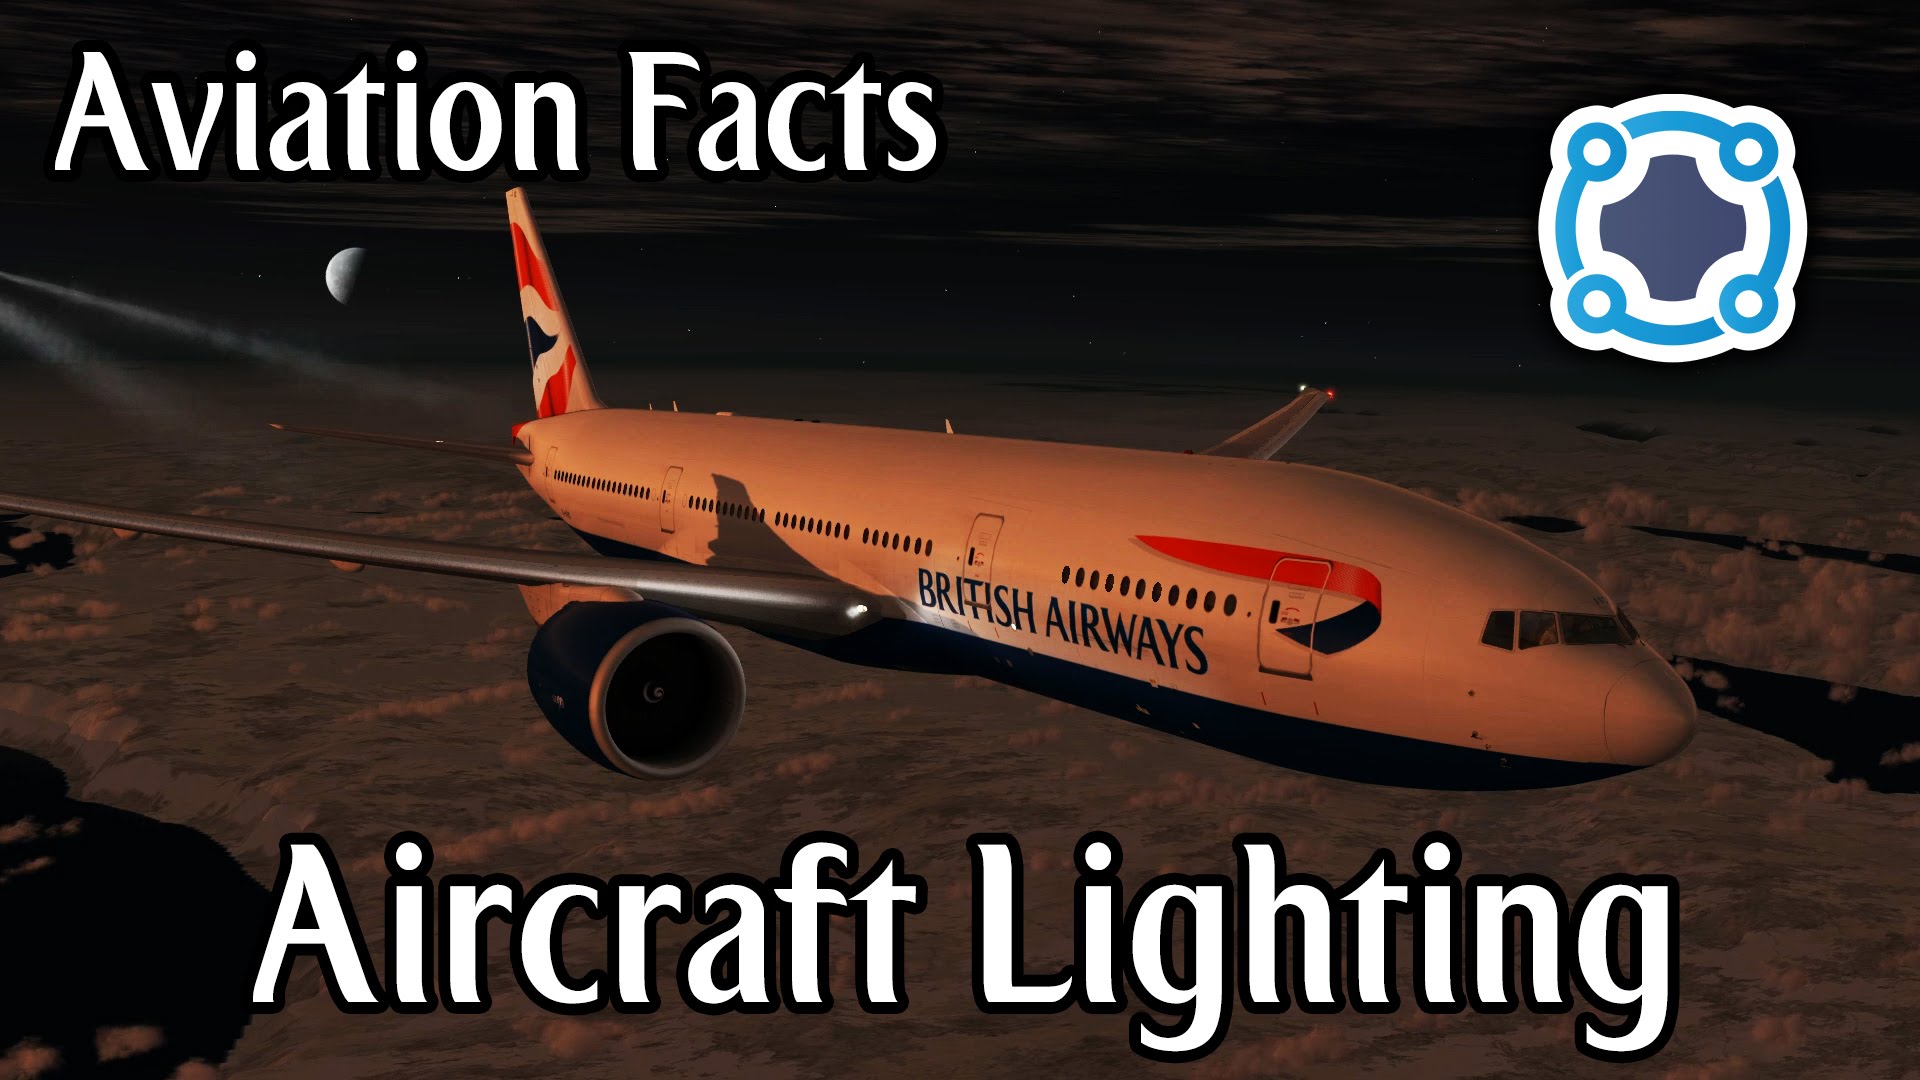 Why Do Planes Have Red And Green Lights?